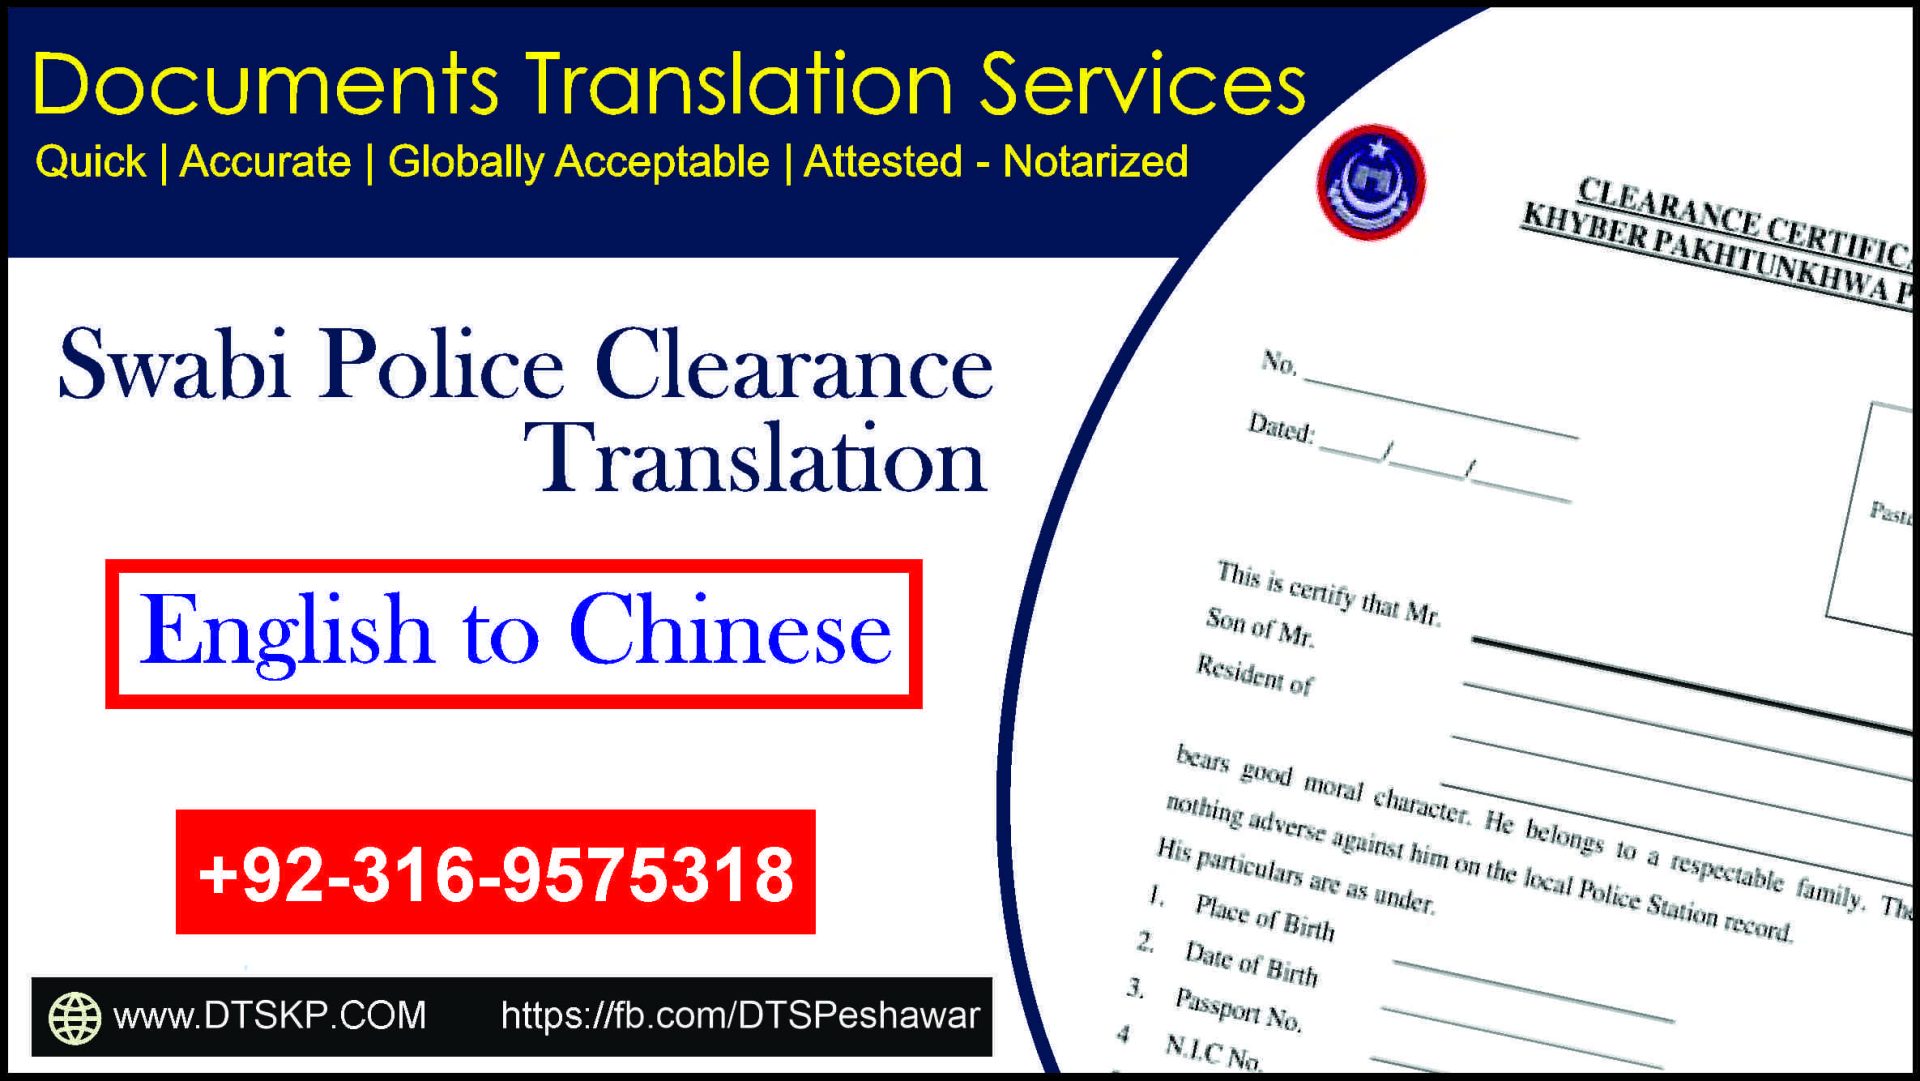 Police Clearance Certificate Translation, English to Russian Translation, Certified Translation Services, Legal Document Translation, Professional Certificate Translators, Multilingual Translation Services, Translation for Immigration Documents, Notarized Police Clearance Translation, Language Solutions for Official Certificates, Expert English to Russian Translators, International Certificate Translation, Confidential Document Translations, Language Services for Legal Documents, Certified Translator for Clearance Certificates, Legalized Police Certificate Translation, Accurate Translation of Official Papers, Document Translation for Visa Applications, Russian Language Services, Translation for Consular and Embassy Use, Official Certificate Language Translation,